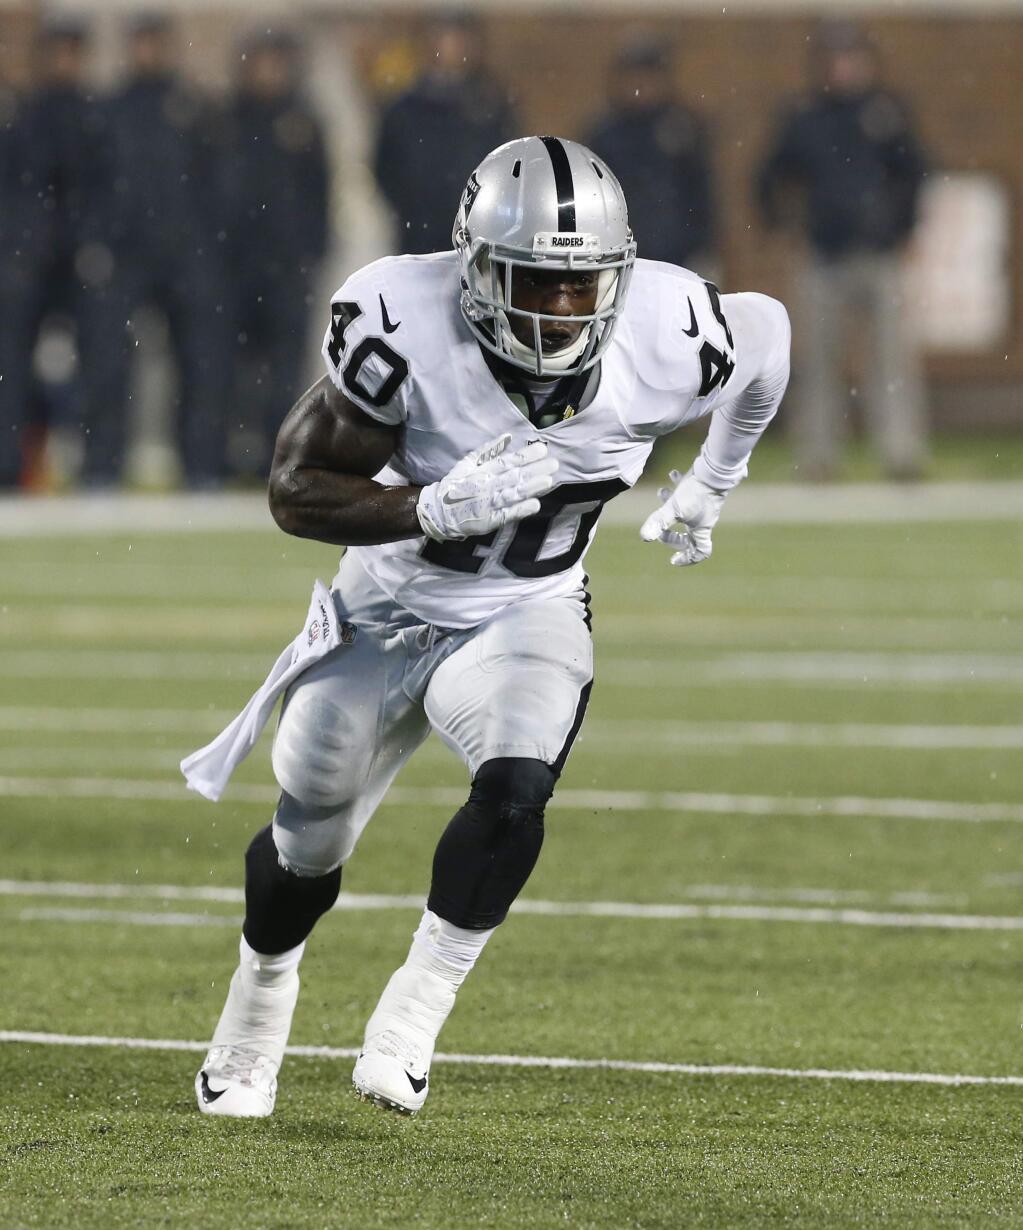 Oakland Raiders running back Michael Dyer (40) runs a pattern during the second half of a preseason NFL football game against the Minnesota Vikings, Saturday, Aug. 22, 2015, in Minneapolis. (AP Photo/Jim Mone)